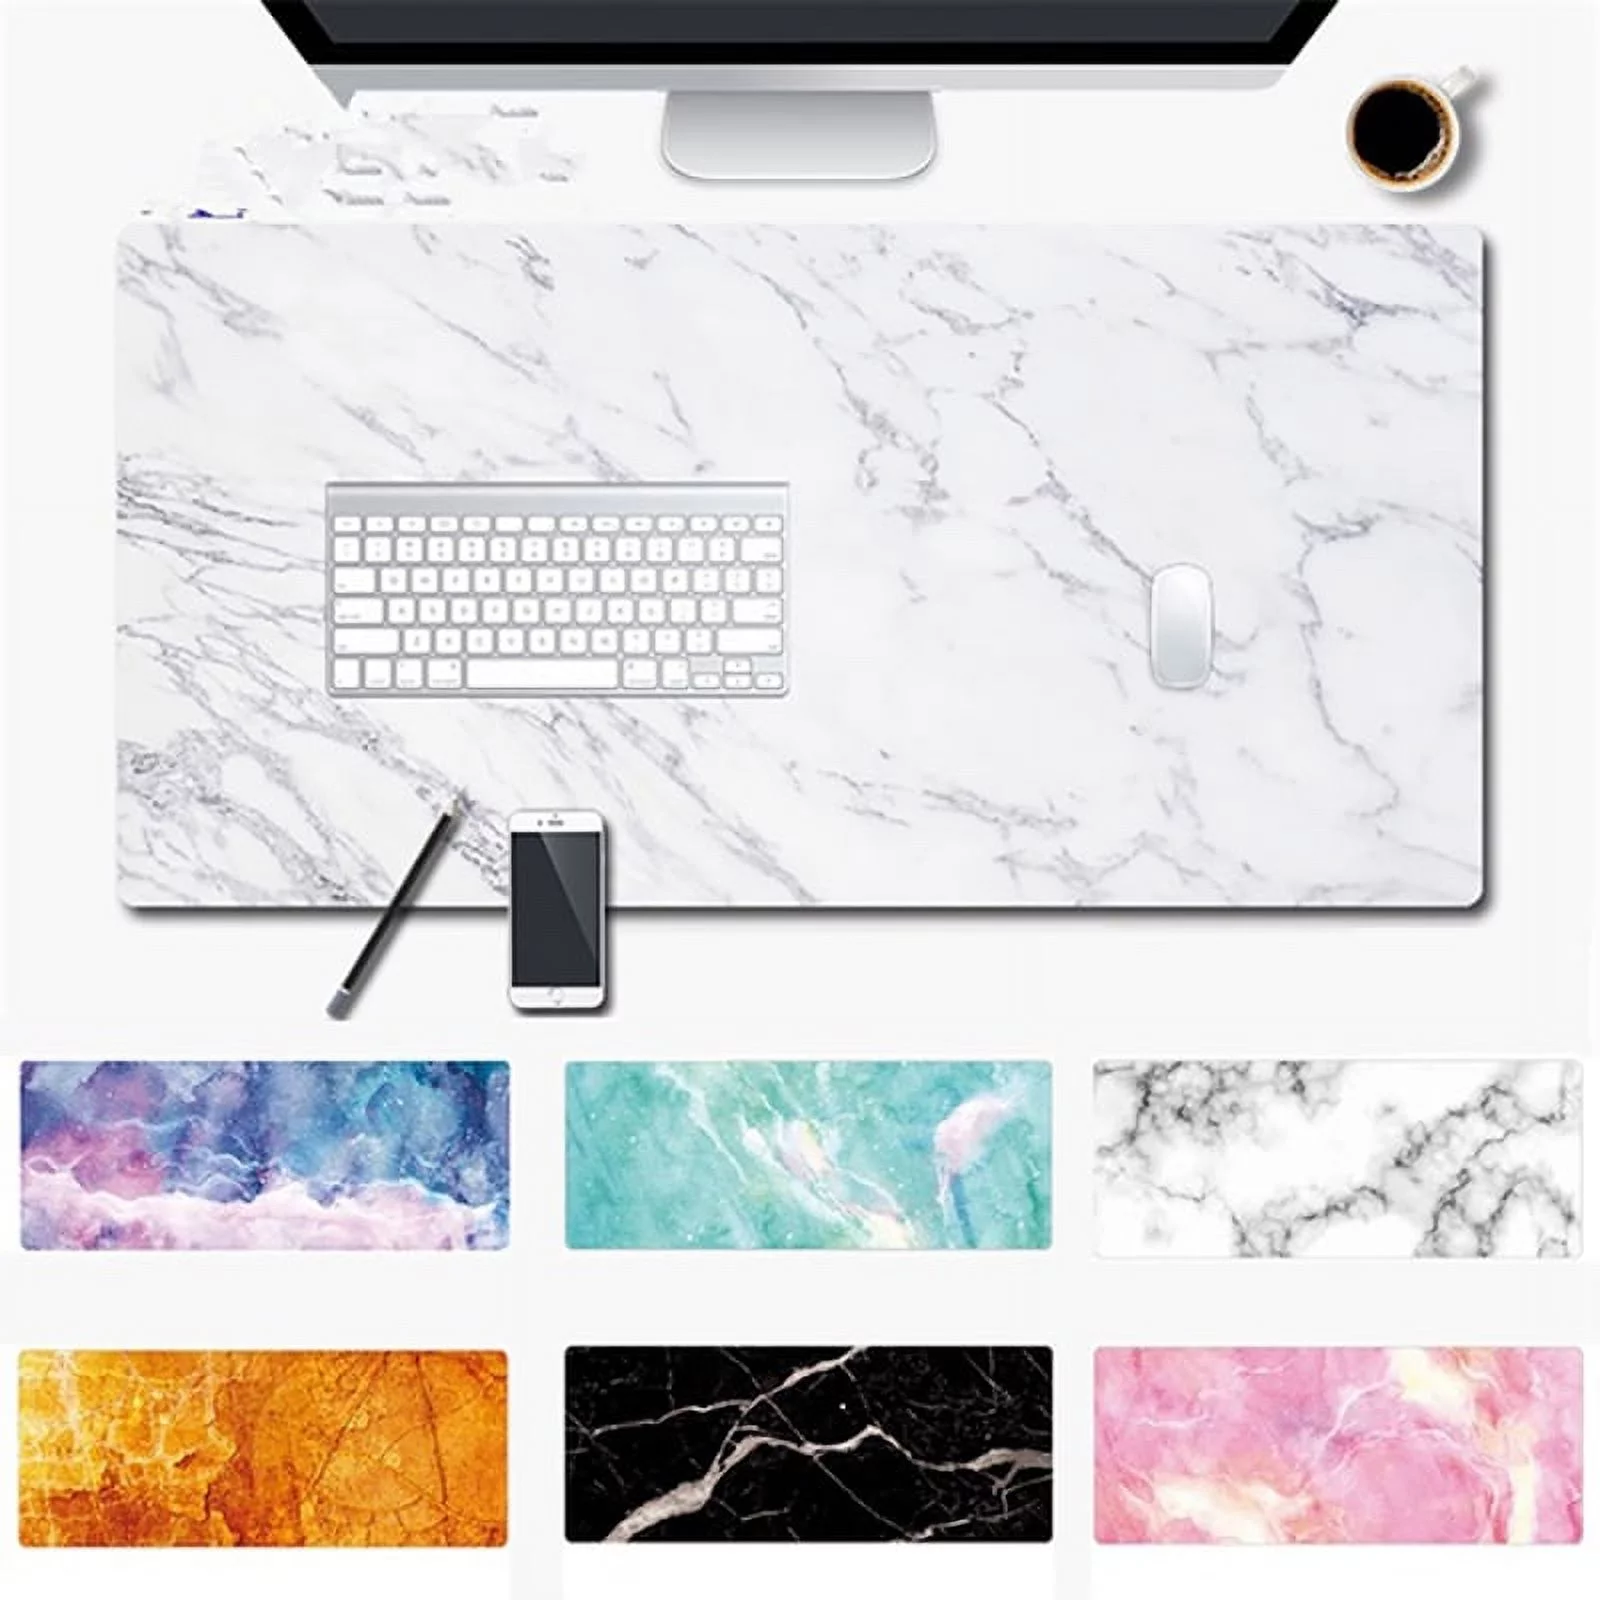 Extended Gaming Mouse Pad, Table Rubber Marble Grain Computer Desk Mat Laptop Cushion Keyboard Mouse Pad for Work and Game - image 1 of 5